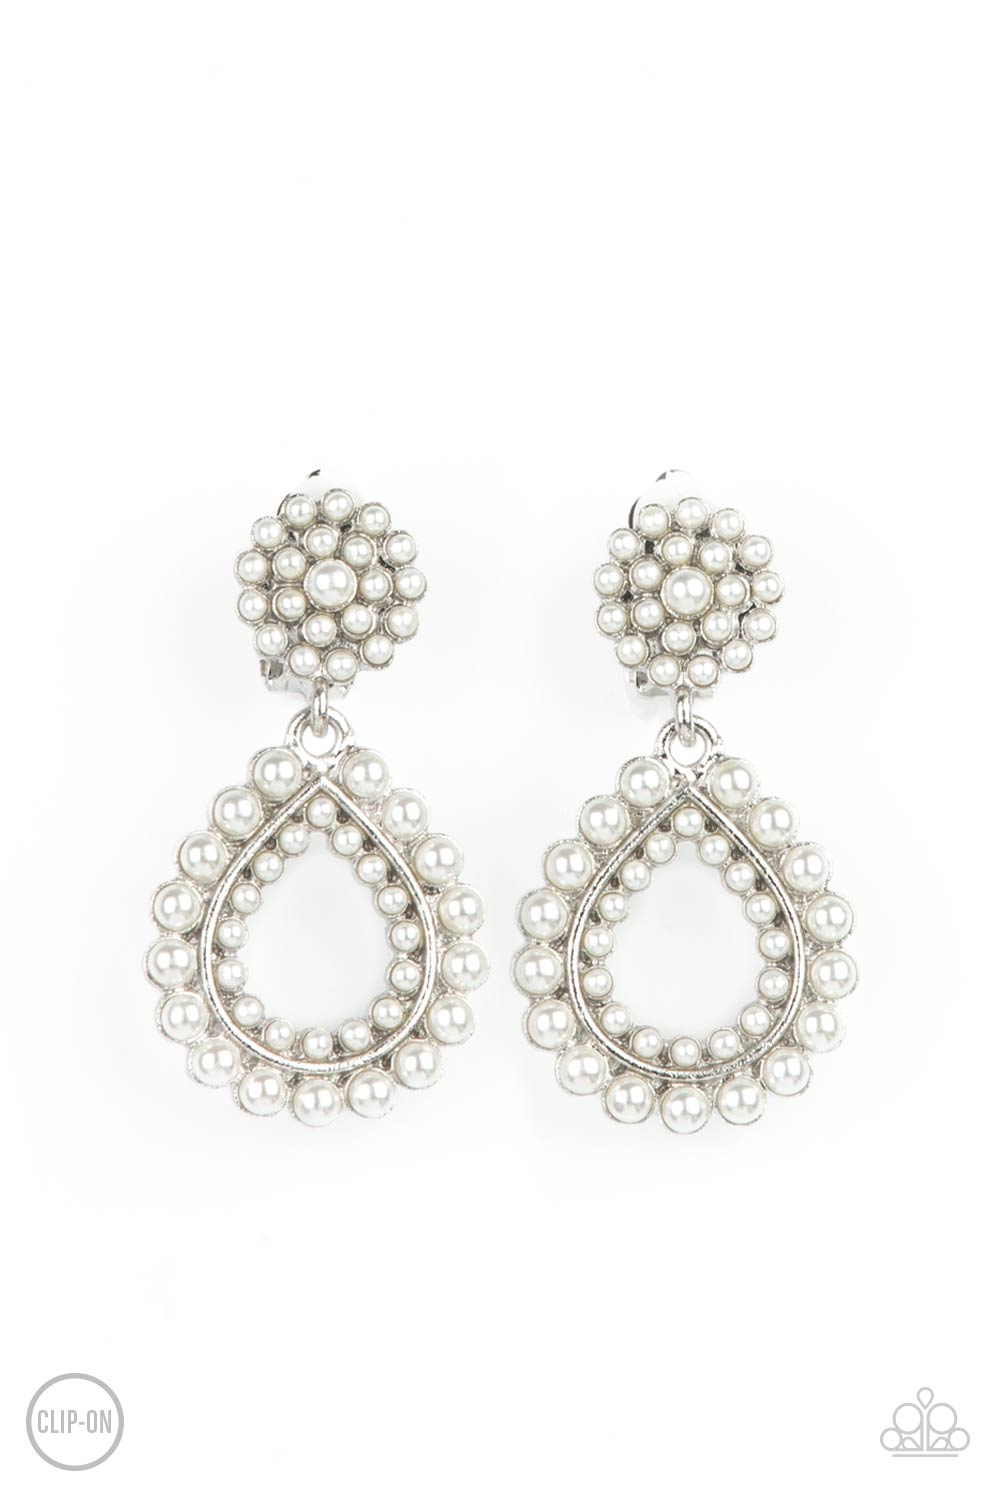 Discerning Droplets White Clip-On Earring - Paparazzi Accessories  Droplets of pearls dot the surface of a silver teardrop frame that suspends from a round pearl encrusted disc for a classic finish. Earring attaches to a standard clip-on fitting.  All Paparazzi Accessories are lead free and nickel free!  Sold as one pair of clip-on earrings.